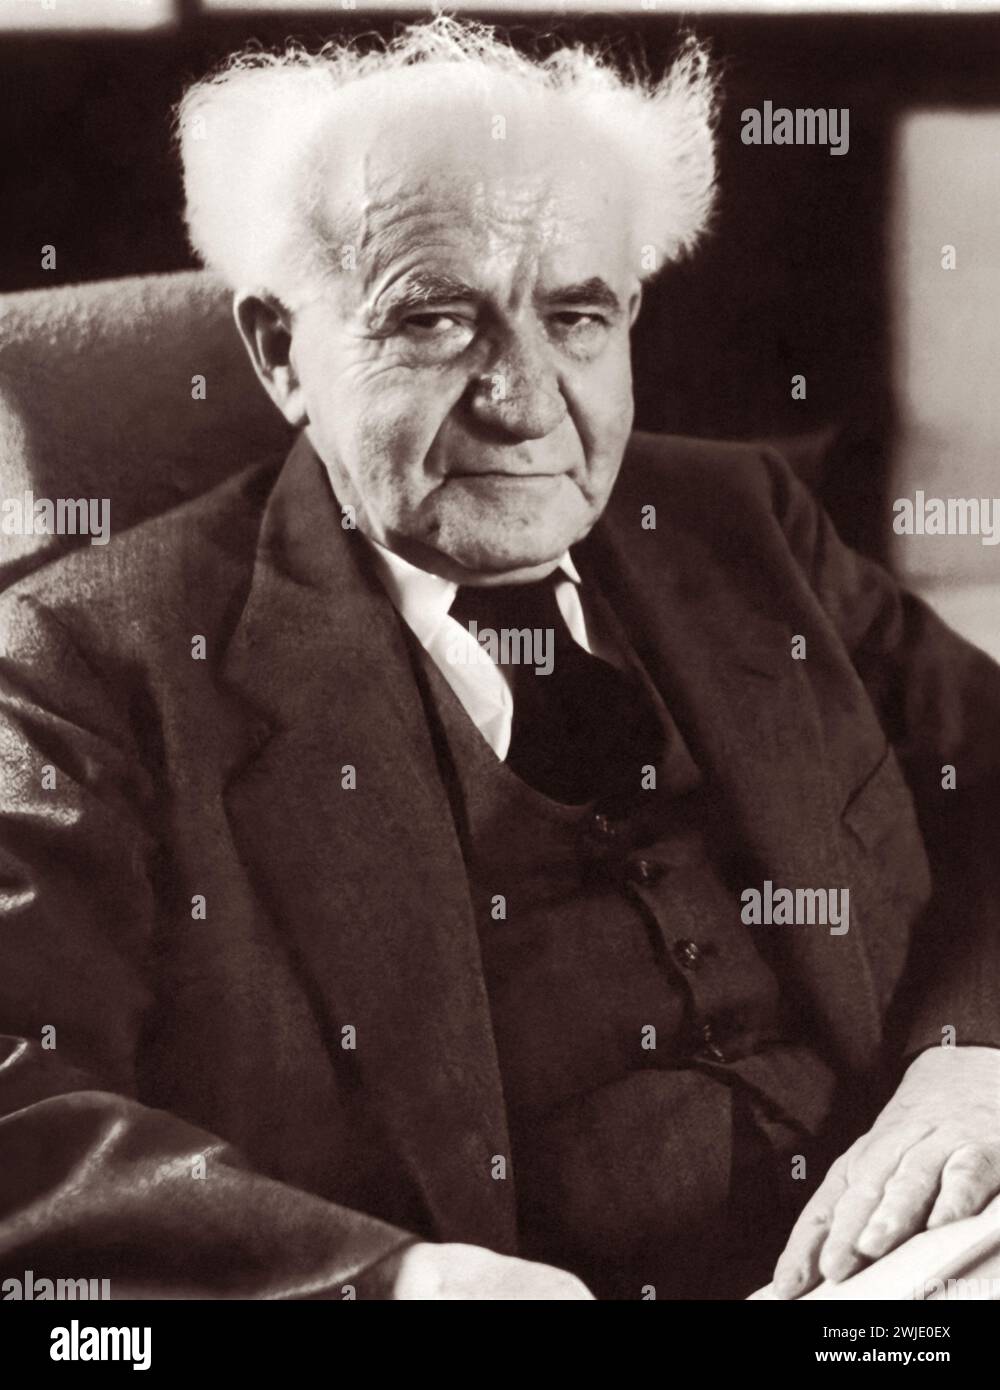 David Ben-Gurion (1886-1973), primary national founder of the State of Israel as well as the state's first prime minister. Stock Photo